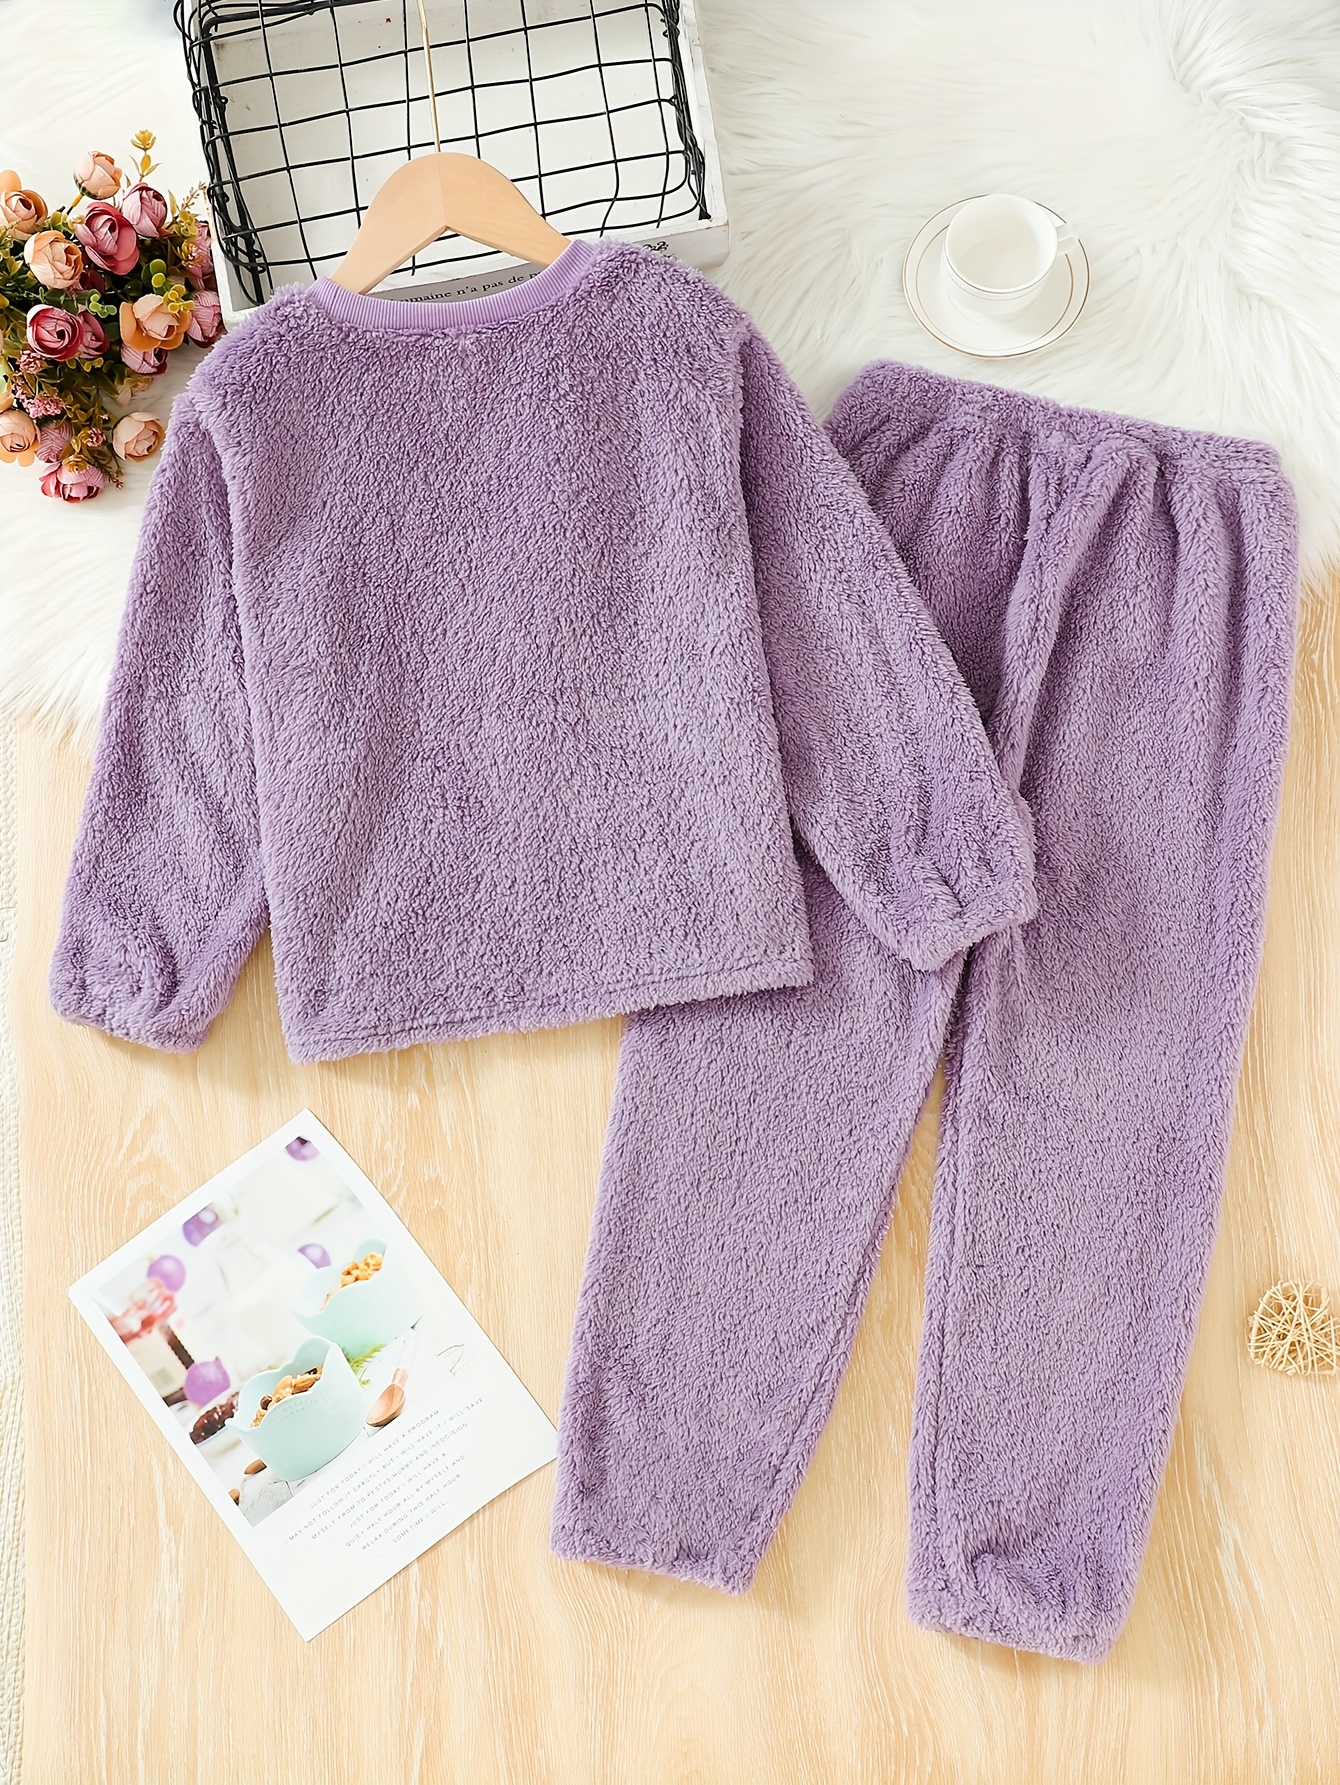 Toddler Girls 2-piece Trendy Plush Flannel Pajama Sets Cute Simple Pattern  Round Neck Long Sleeve Top & Matching Pants Plus Fleece Thermal PJ Sets